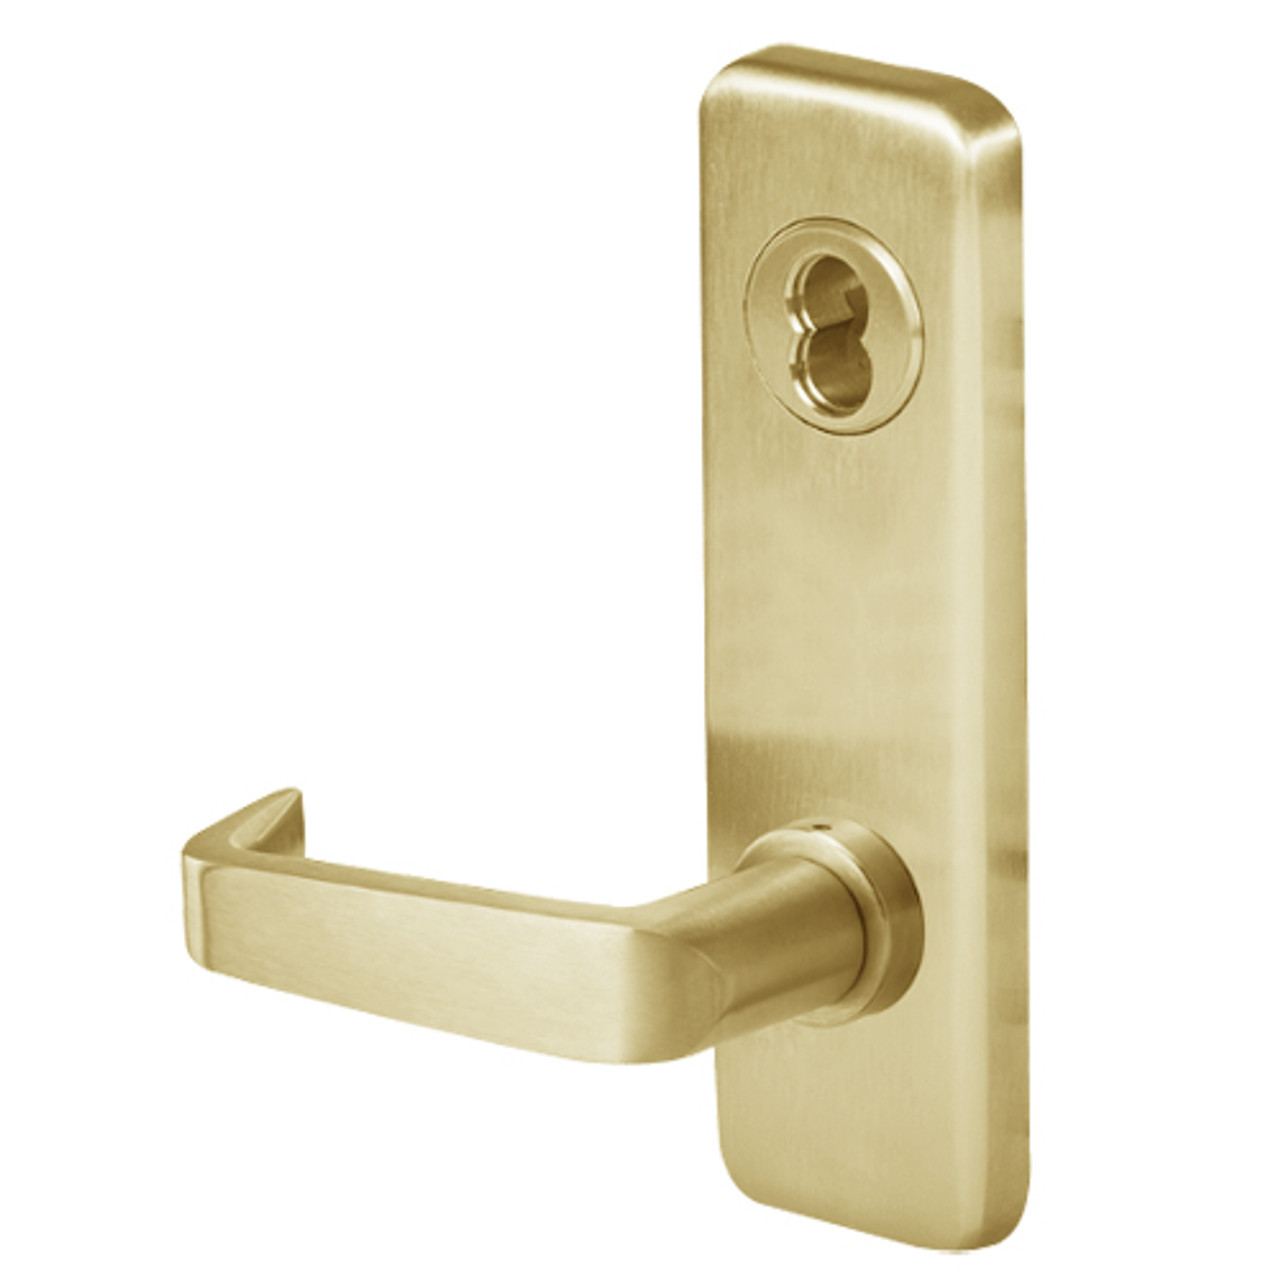 45H0LB15J606 Best 40H Series Privacy with Deadbolt Heavy Duty Mortise Lever Lock with Contour with Angle Return Style in Satin Brass